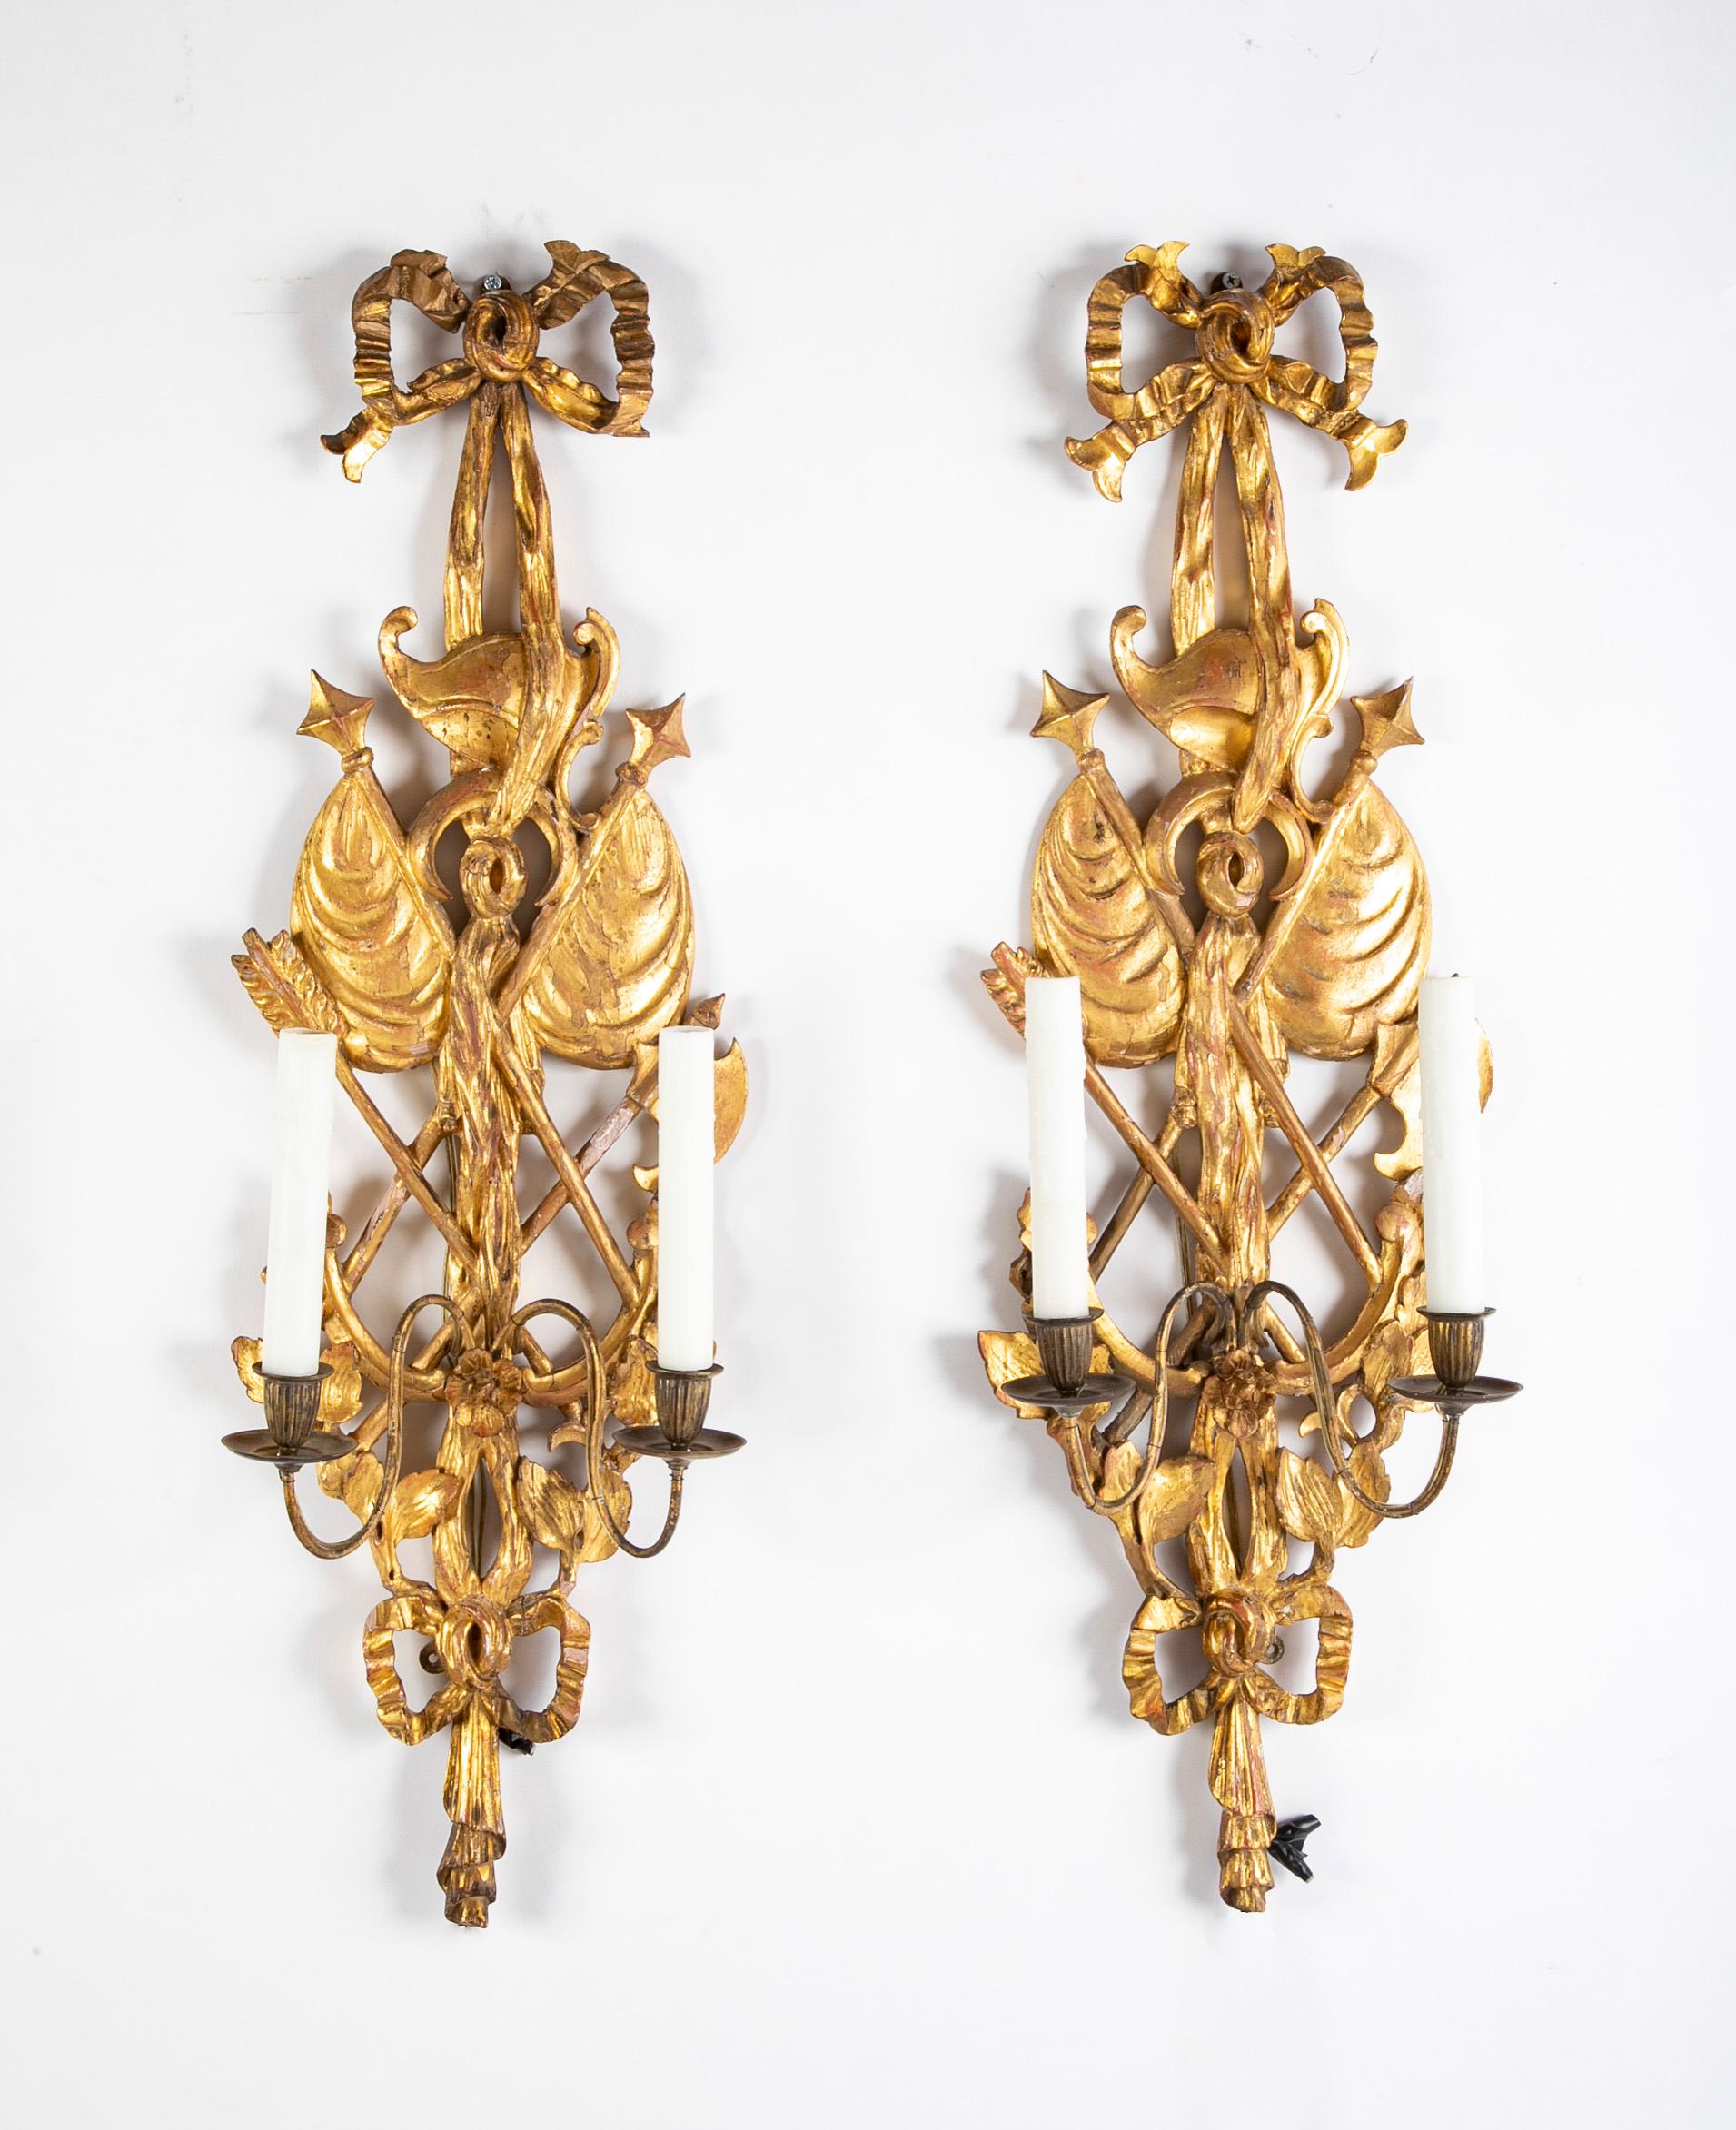 A pair of Italian wall sconces in Neoclassical trophy form of gilt softwood now electrified.  Circa 1860.    